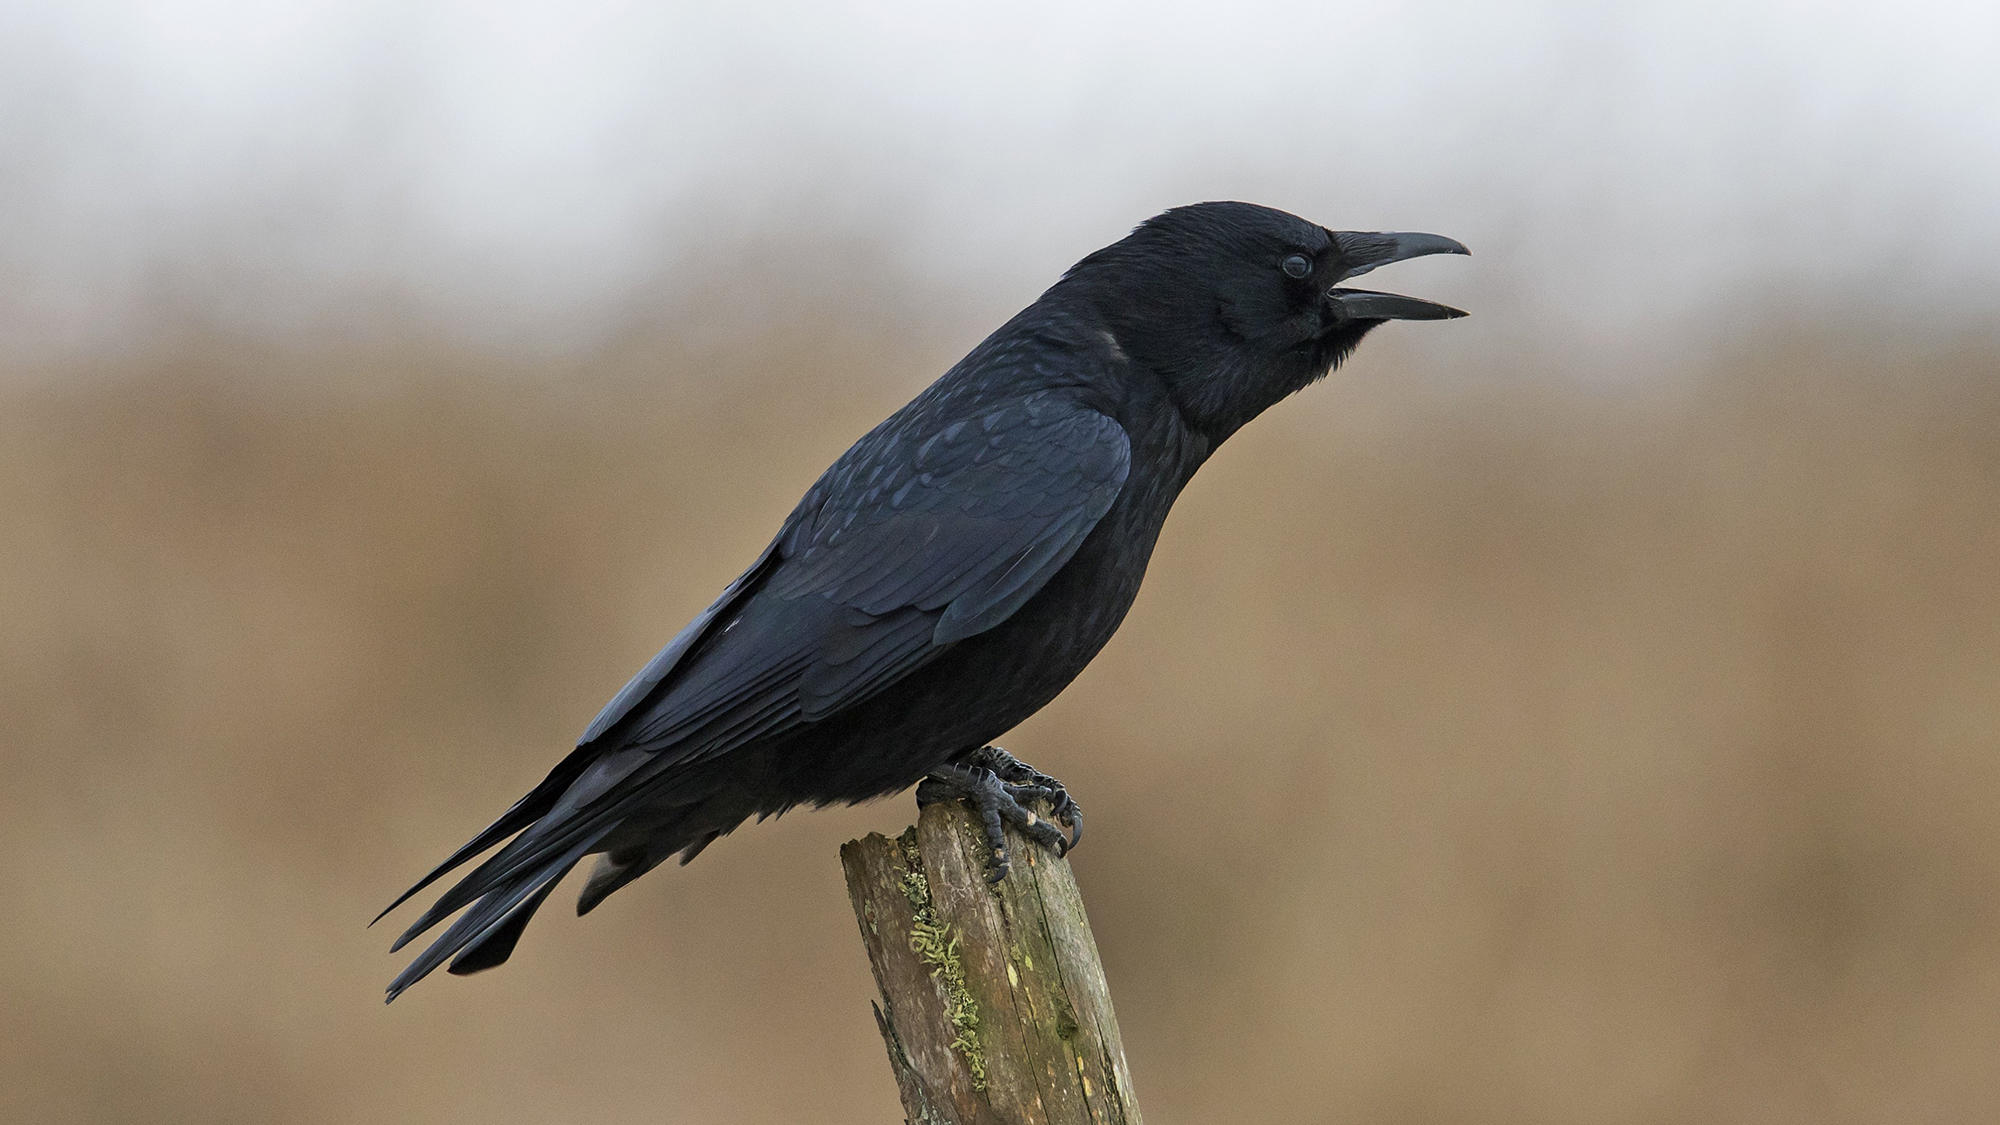 According to new research, crows can 'count' in the same way as toddlers